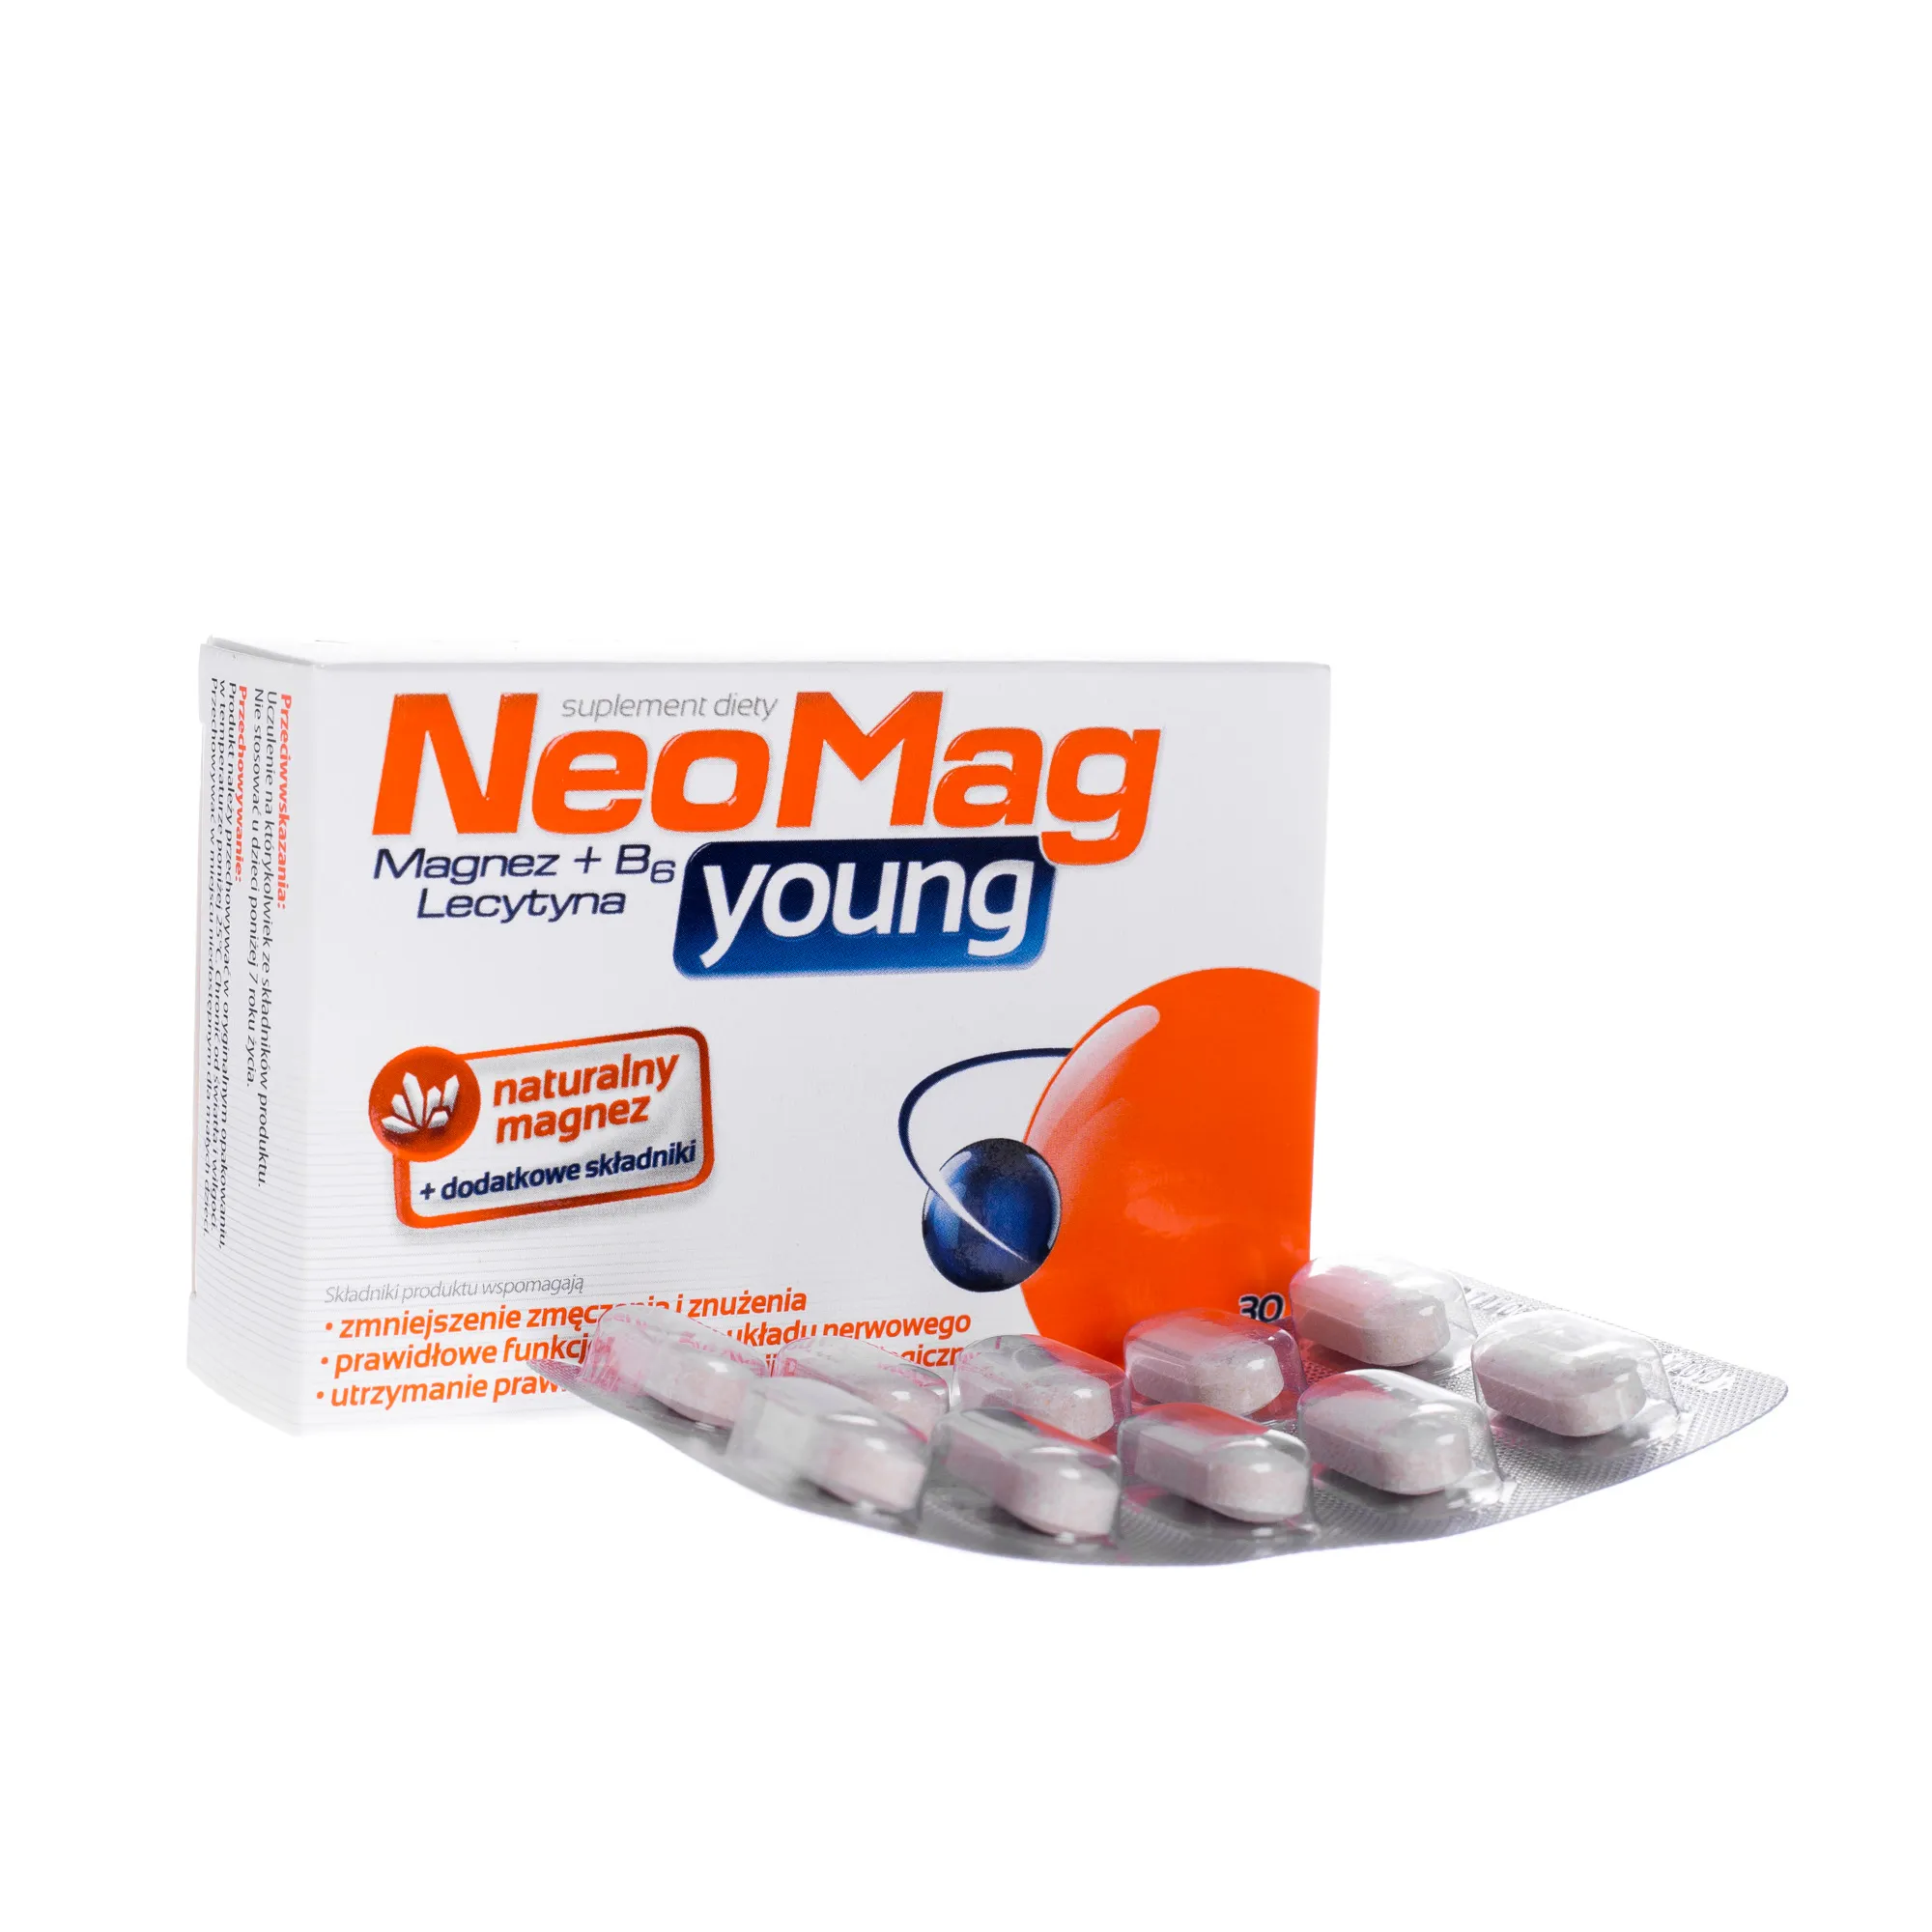 NeoMag young, suplement diety, 30 tabletek 